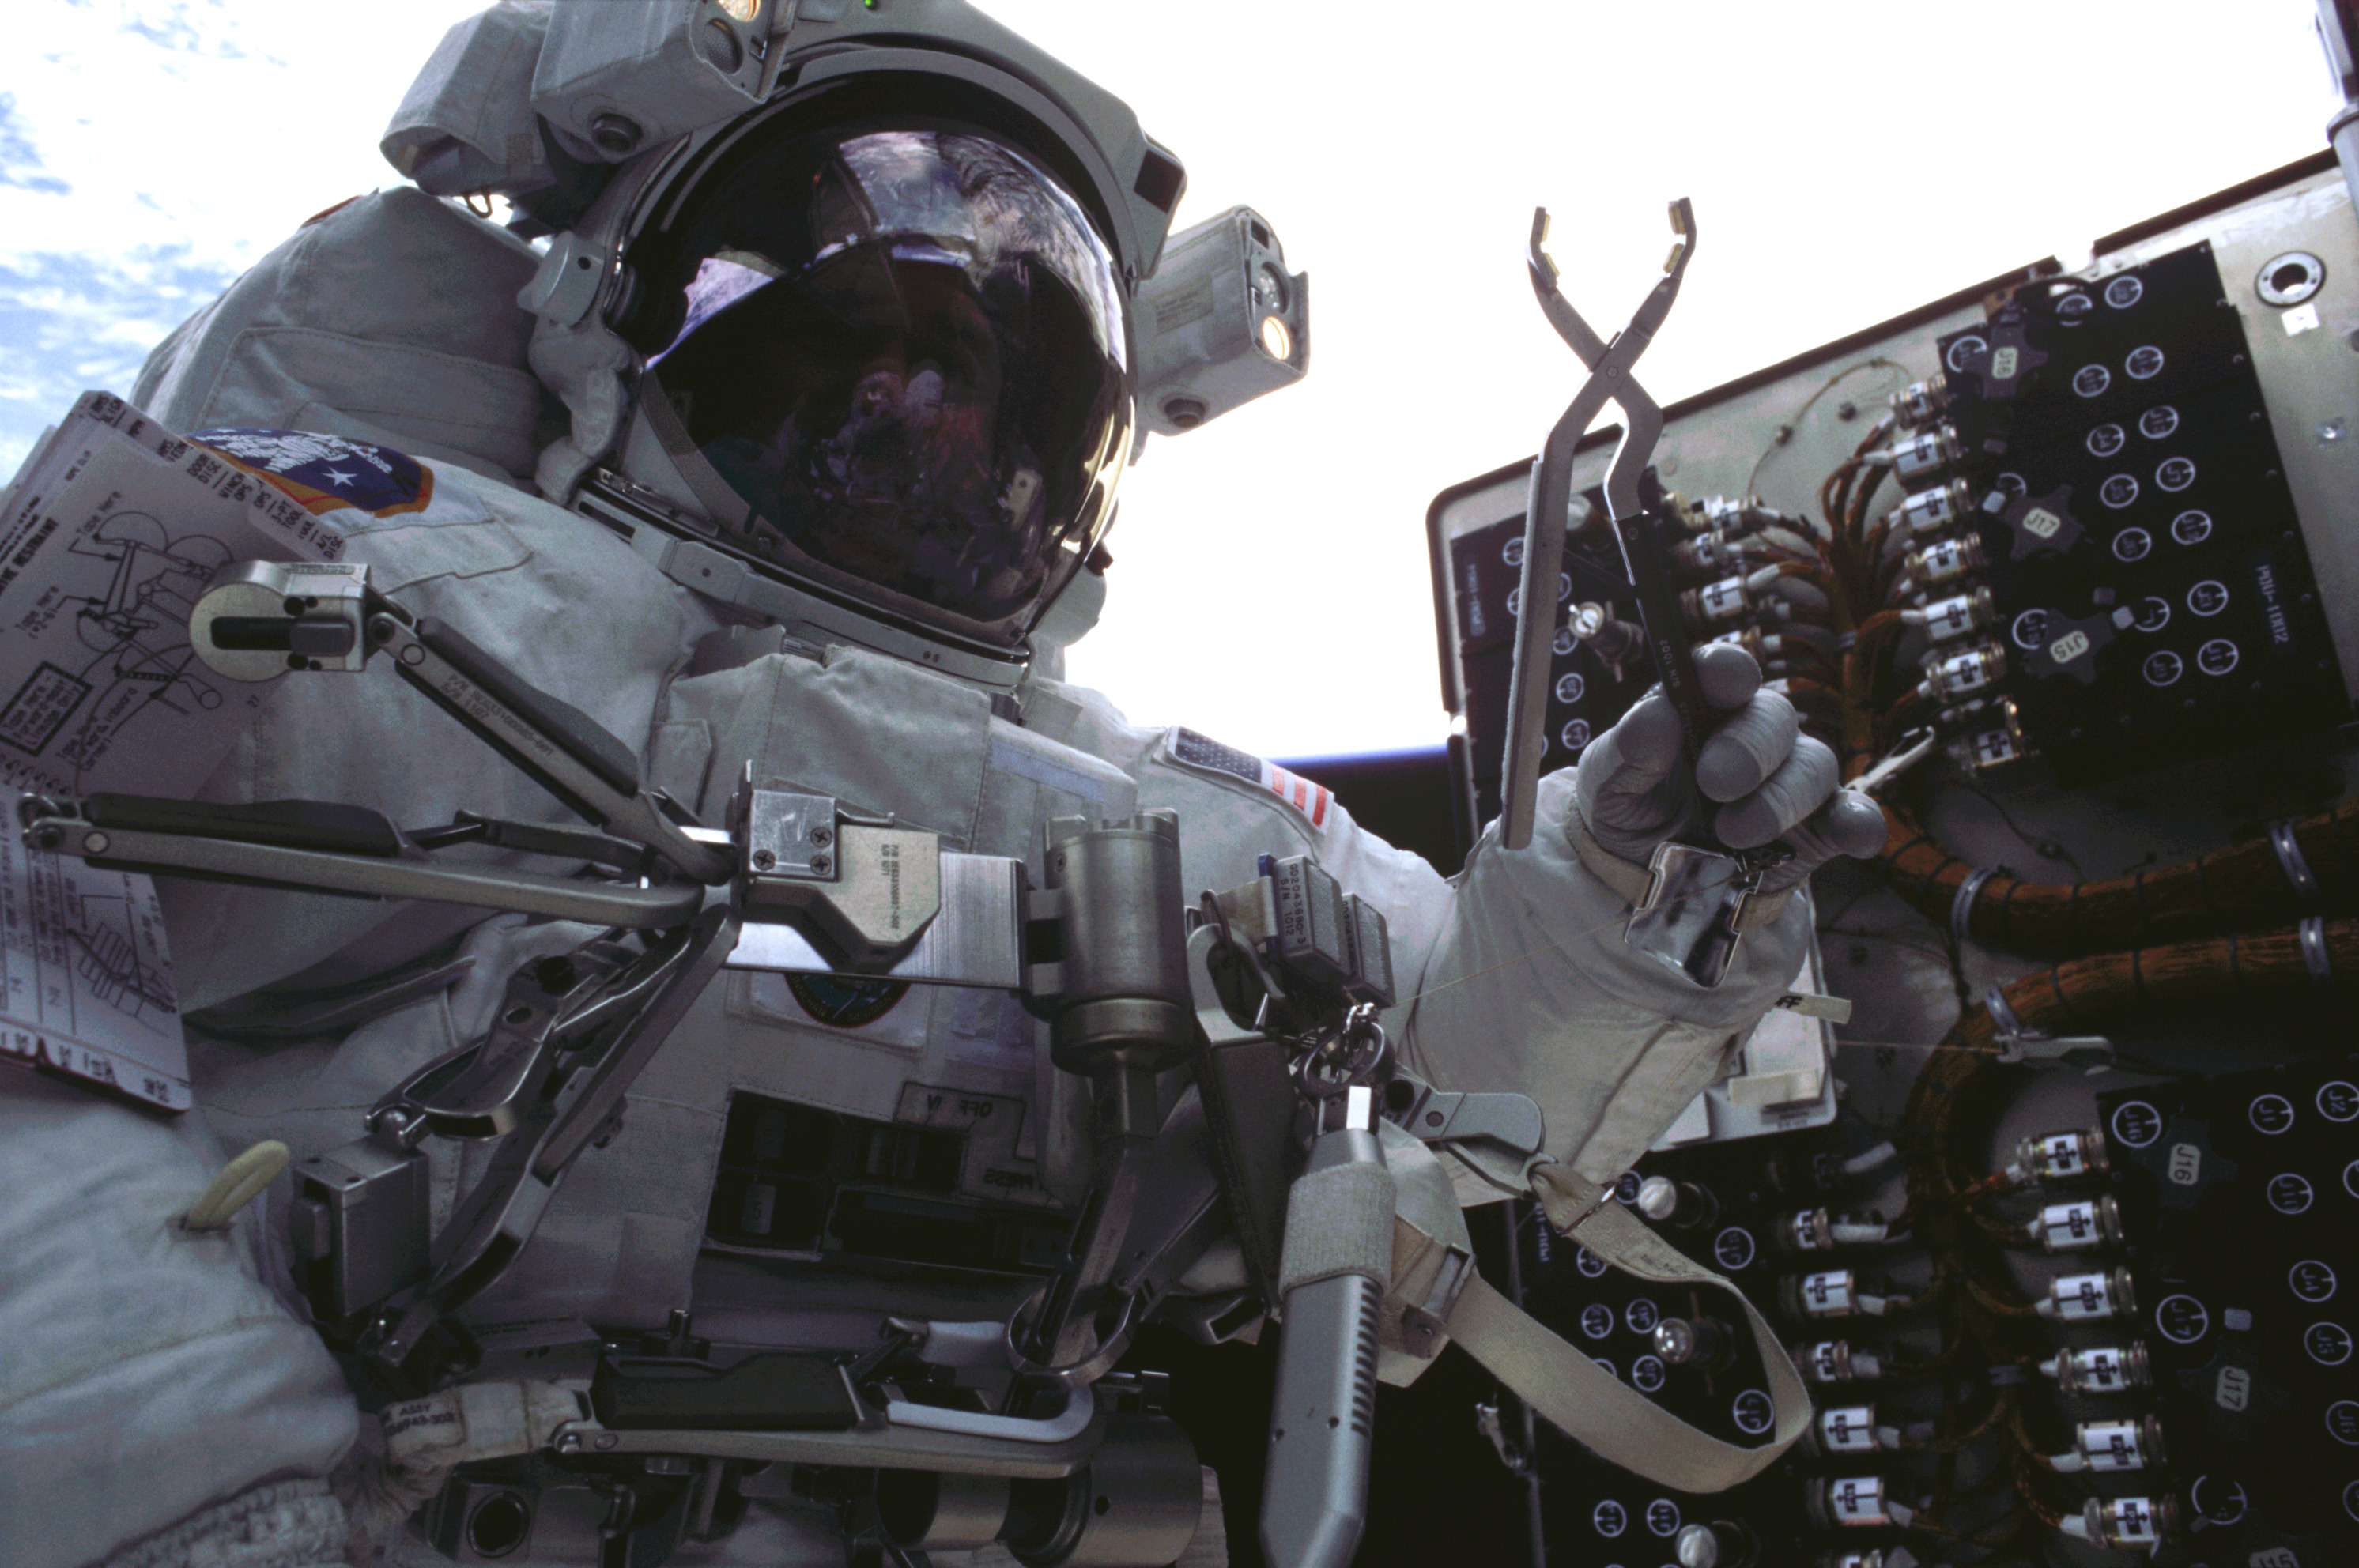 An astronaut holds a specialized pair of pliers used to couple/decouple electrical connectors to a power control unit.